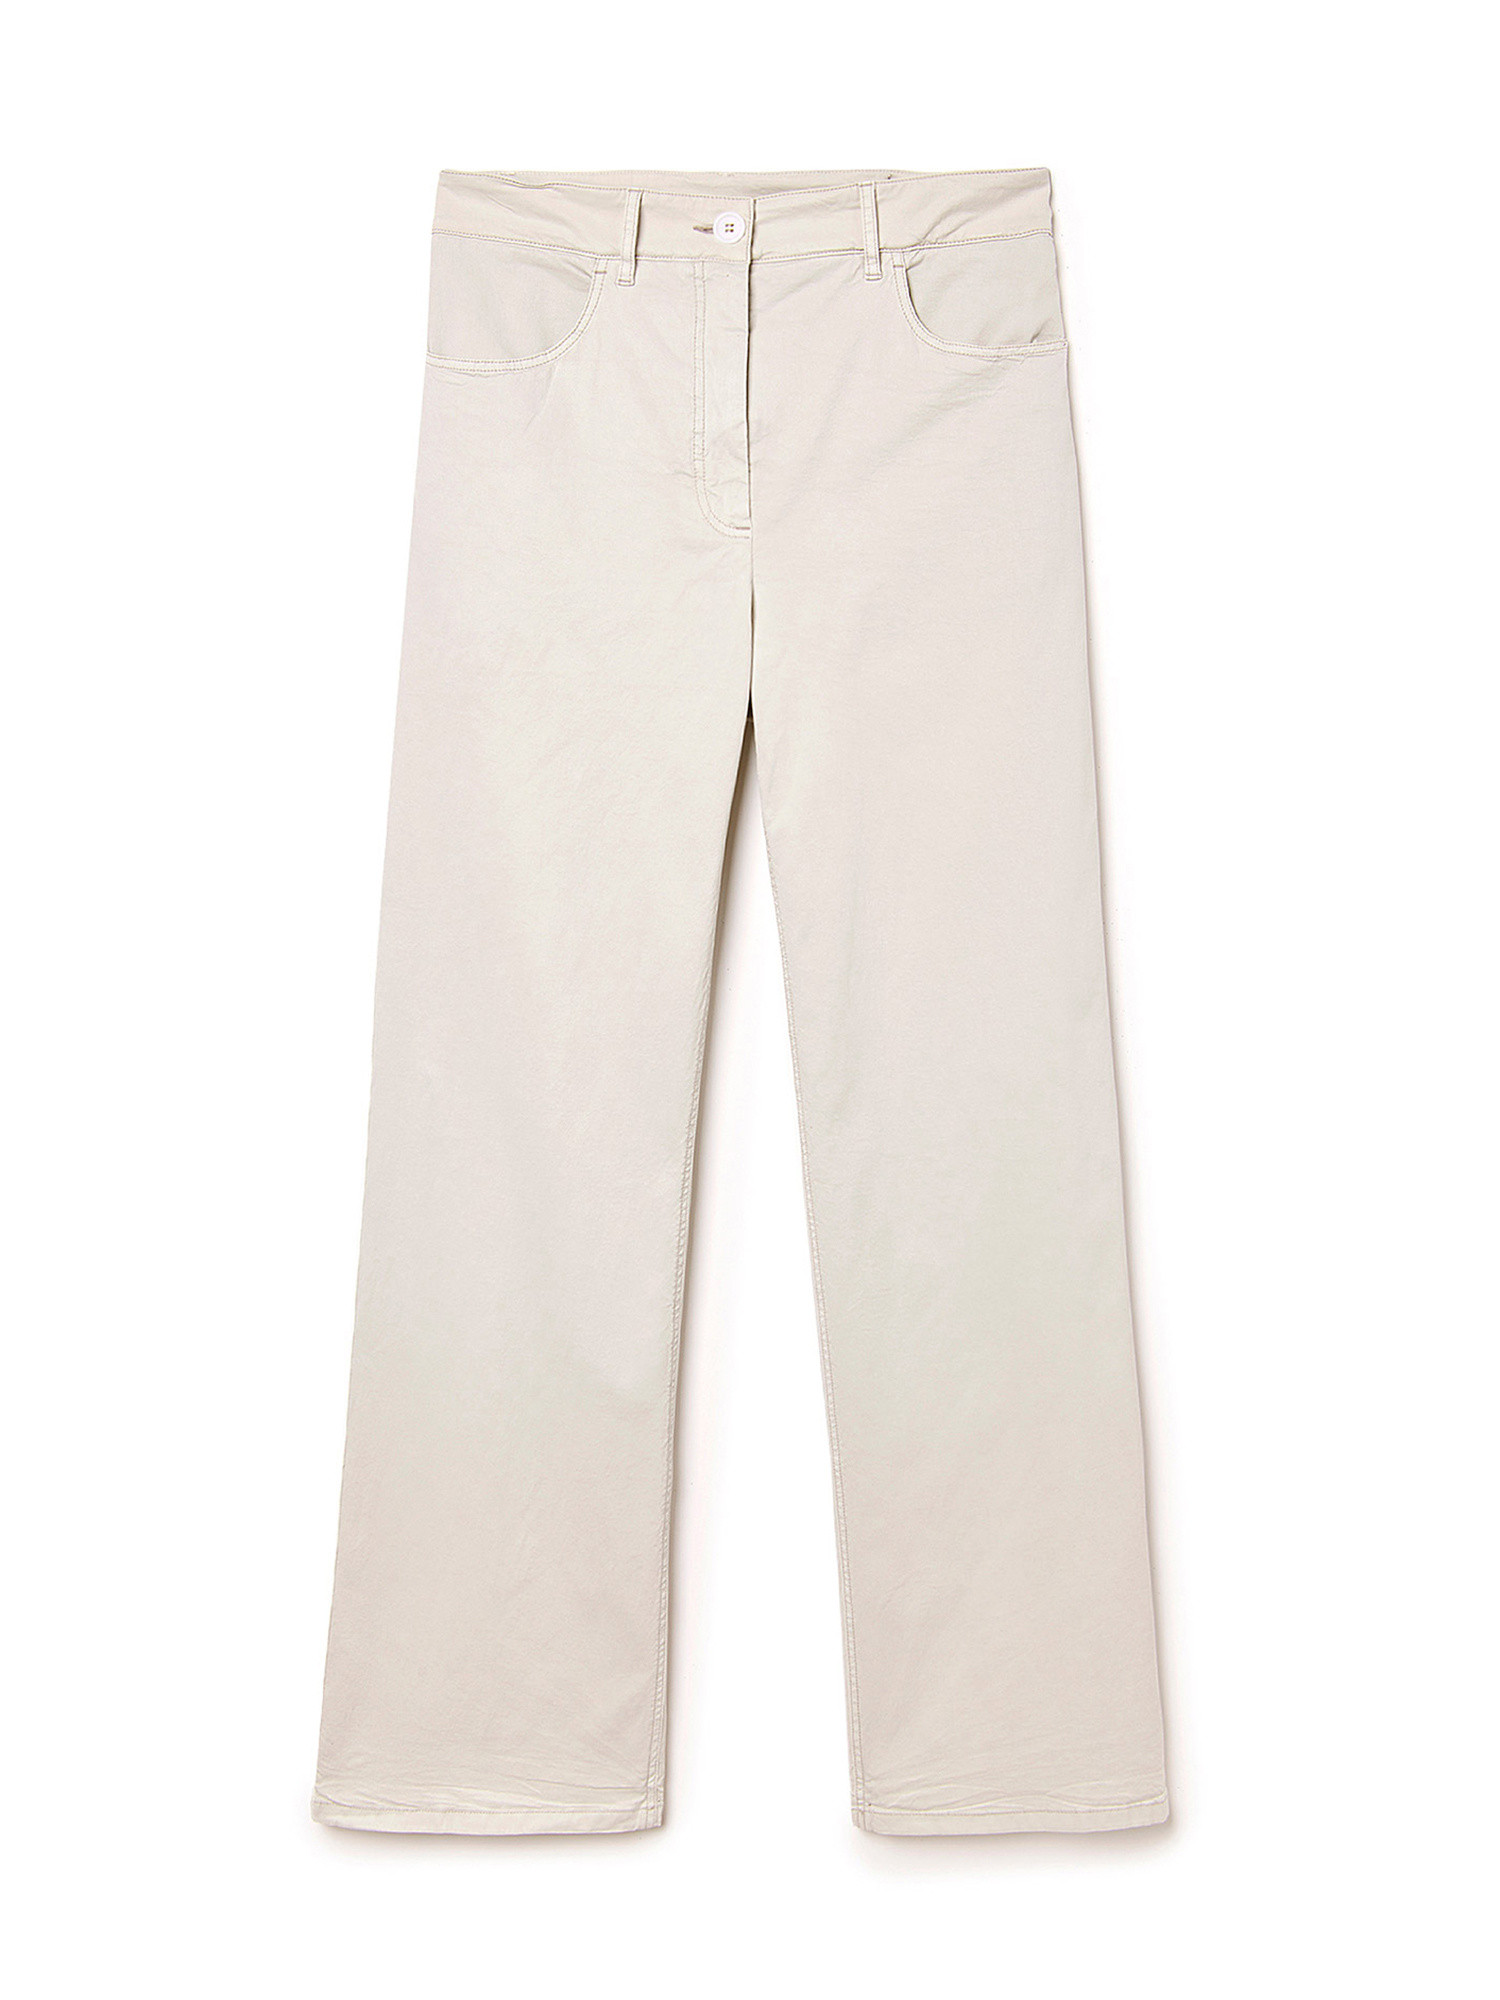 Olivina trousers in garment-dyed cotton twill and stretch lyocell, White, large image number 0